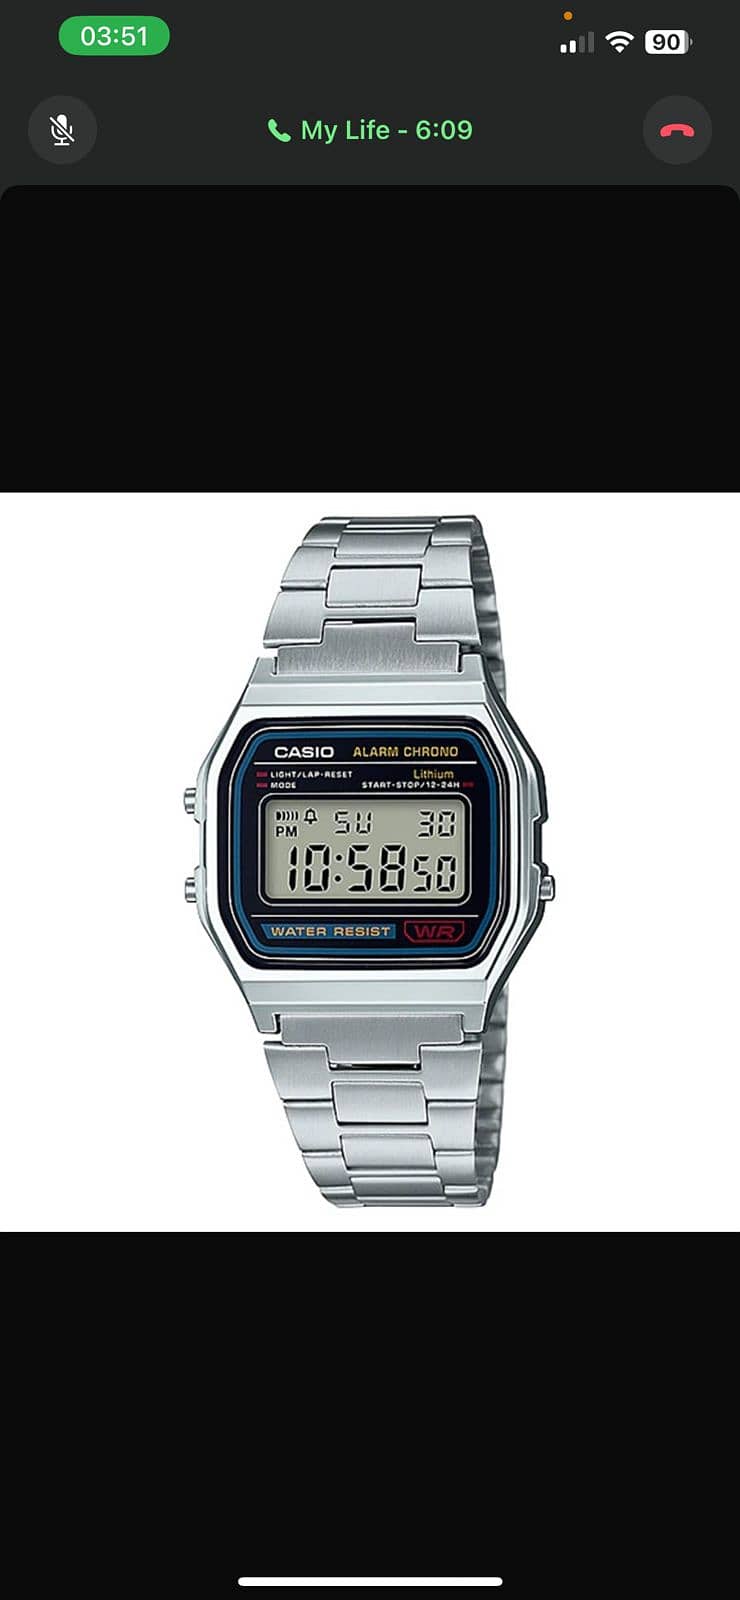 Casio watches on discounted prices 18